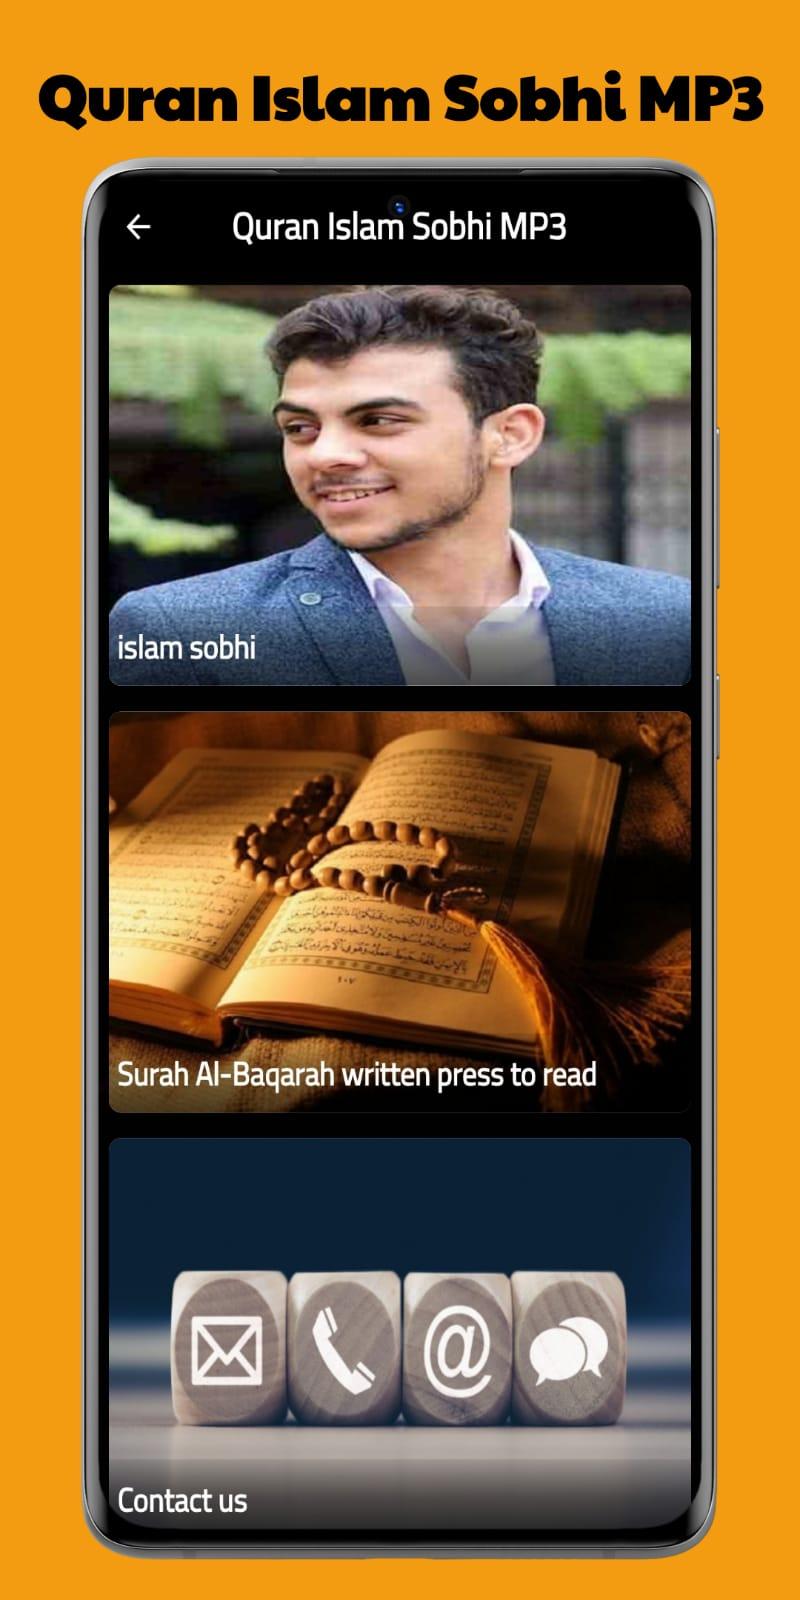 Quran Islam Sobhi ‎MP3 for Android - APK Download